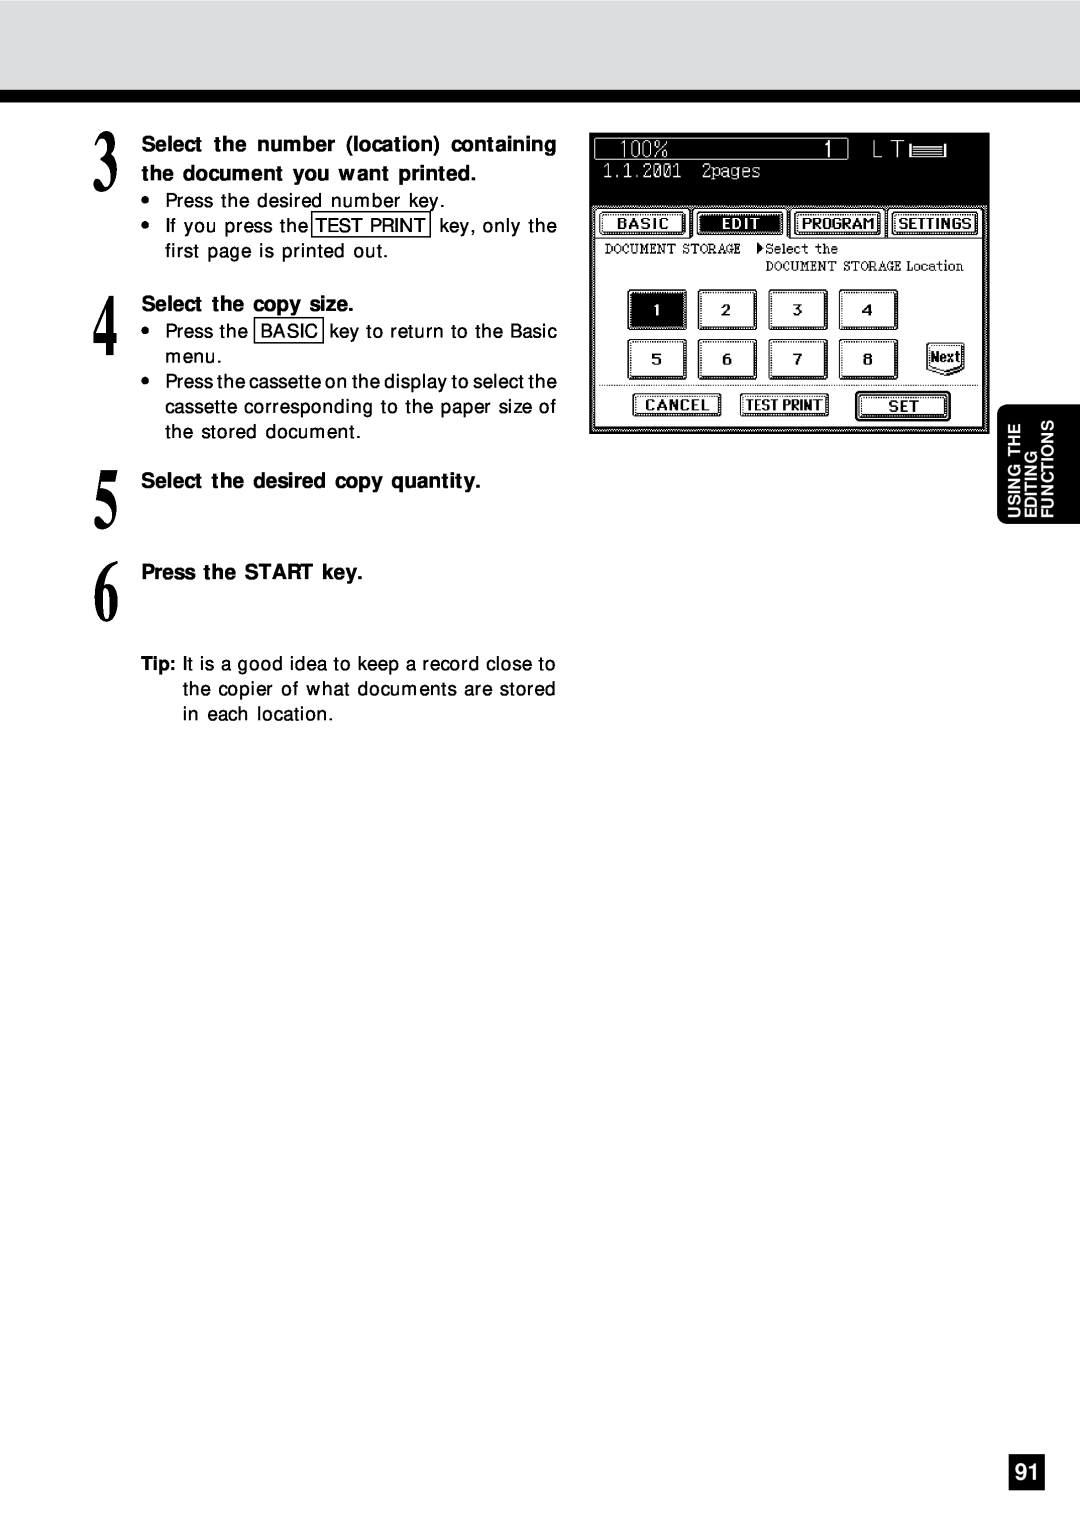 Sharp AR-650 operation manual Select the number location containing, the document you want printed, Select the copy size 